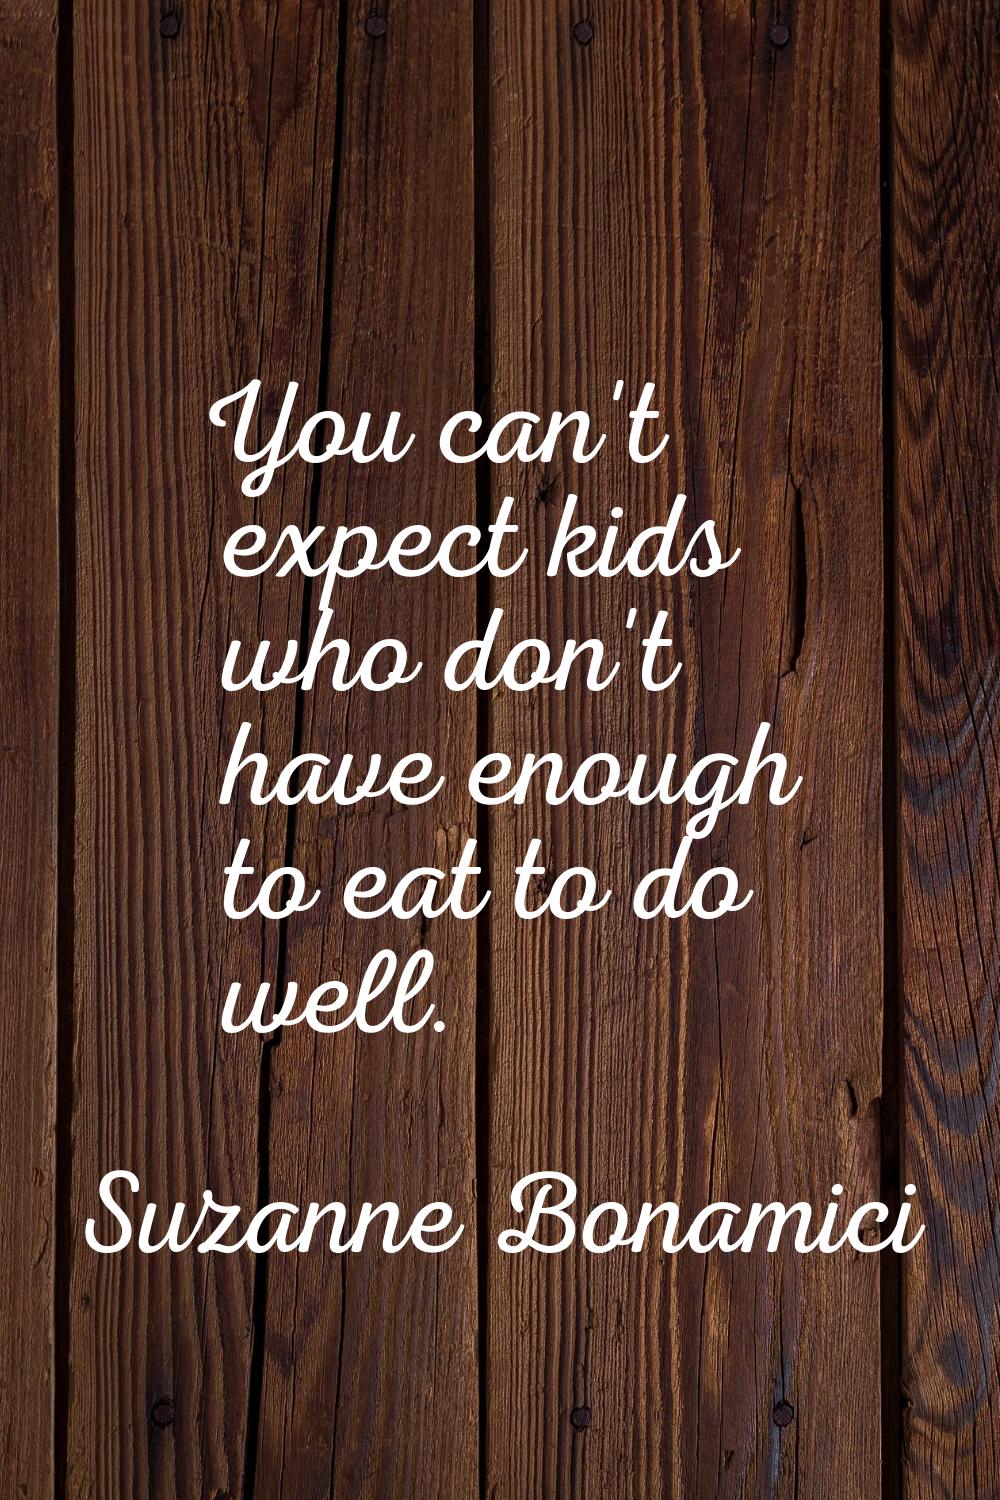 You can't expect kids who don't have enough to eat to do well.